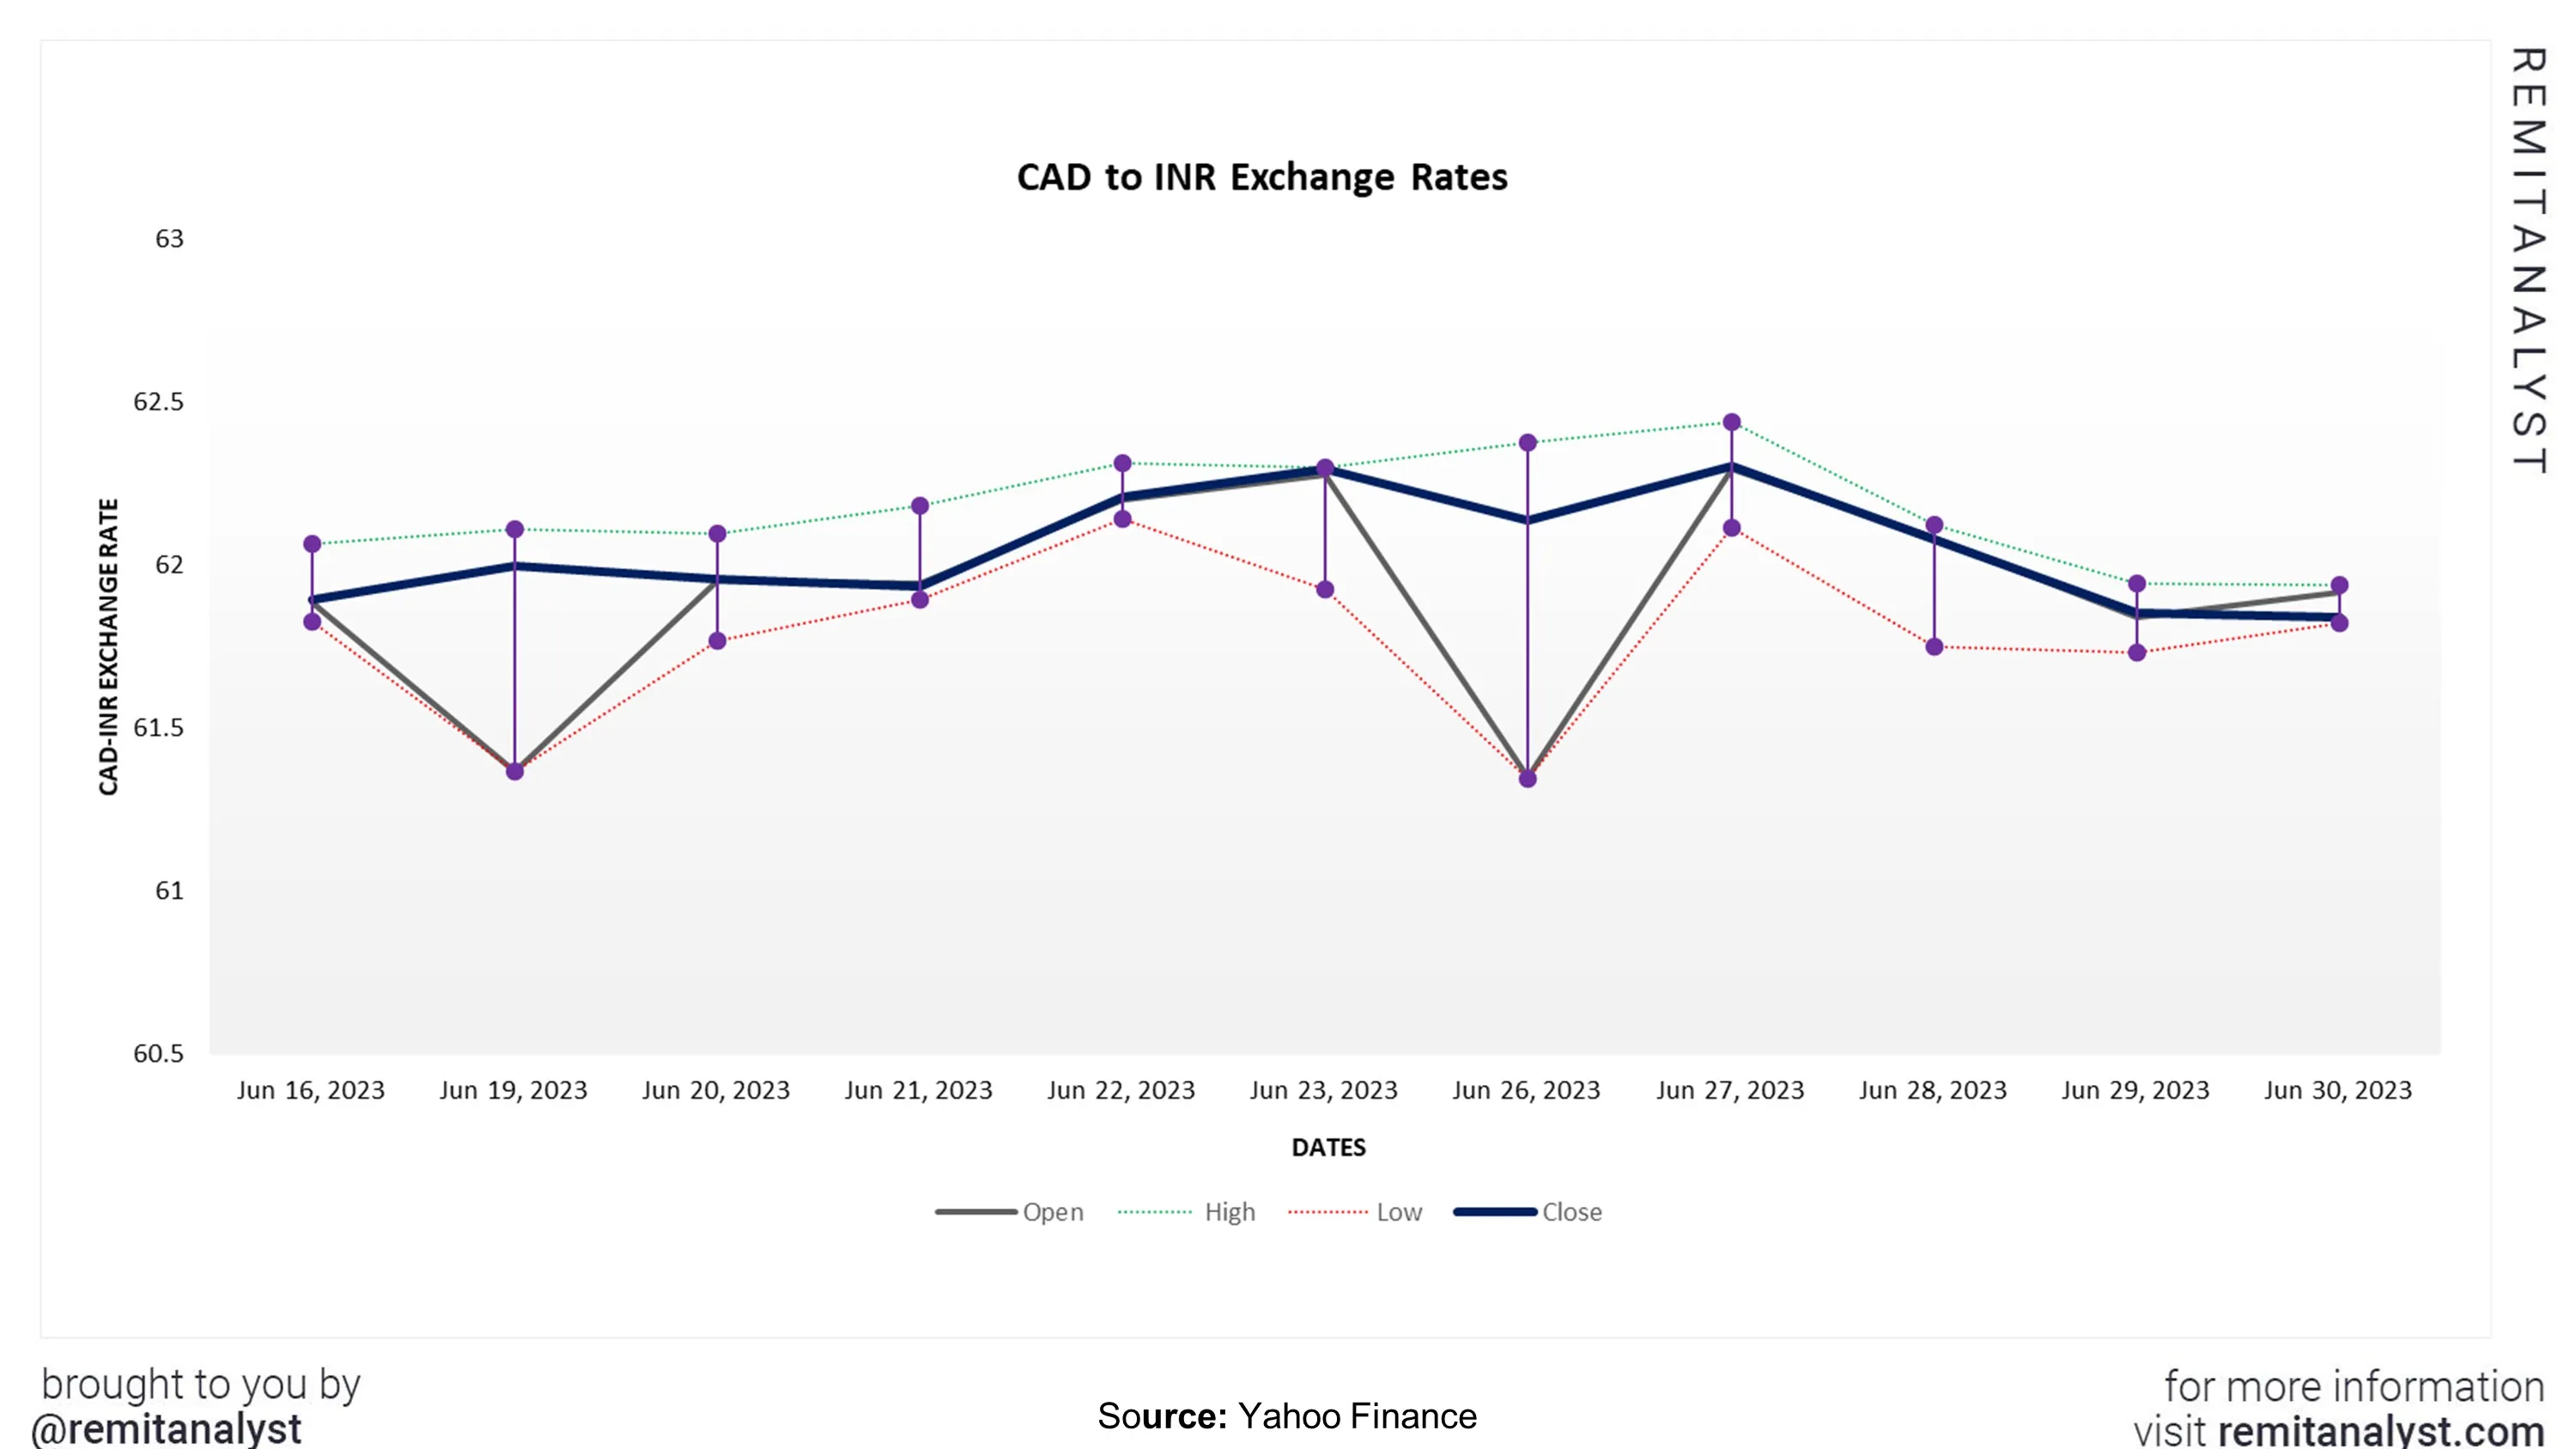 cad-to-inr-exchange-rate-from-16-june-2023-to-30-june-2023